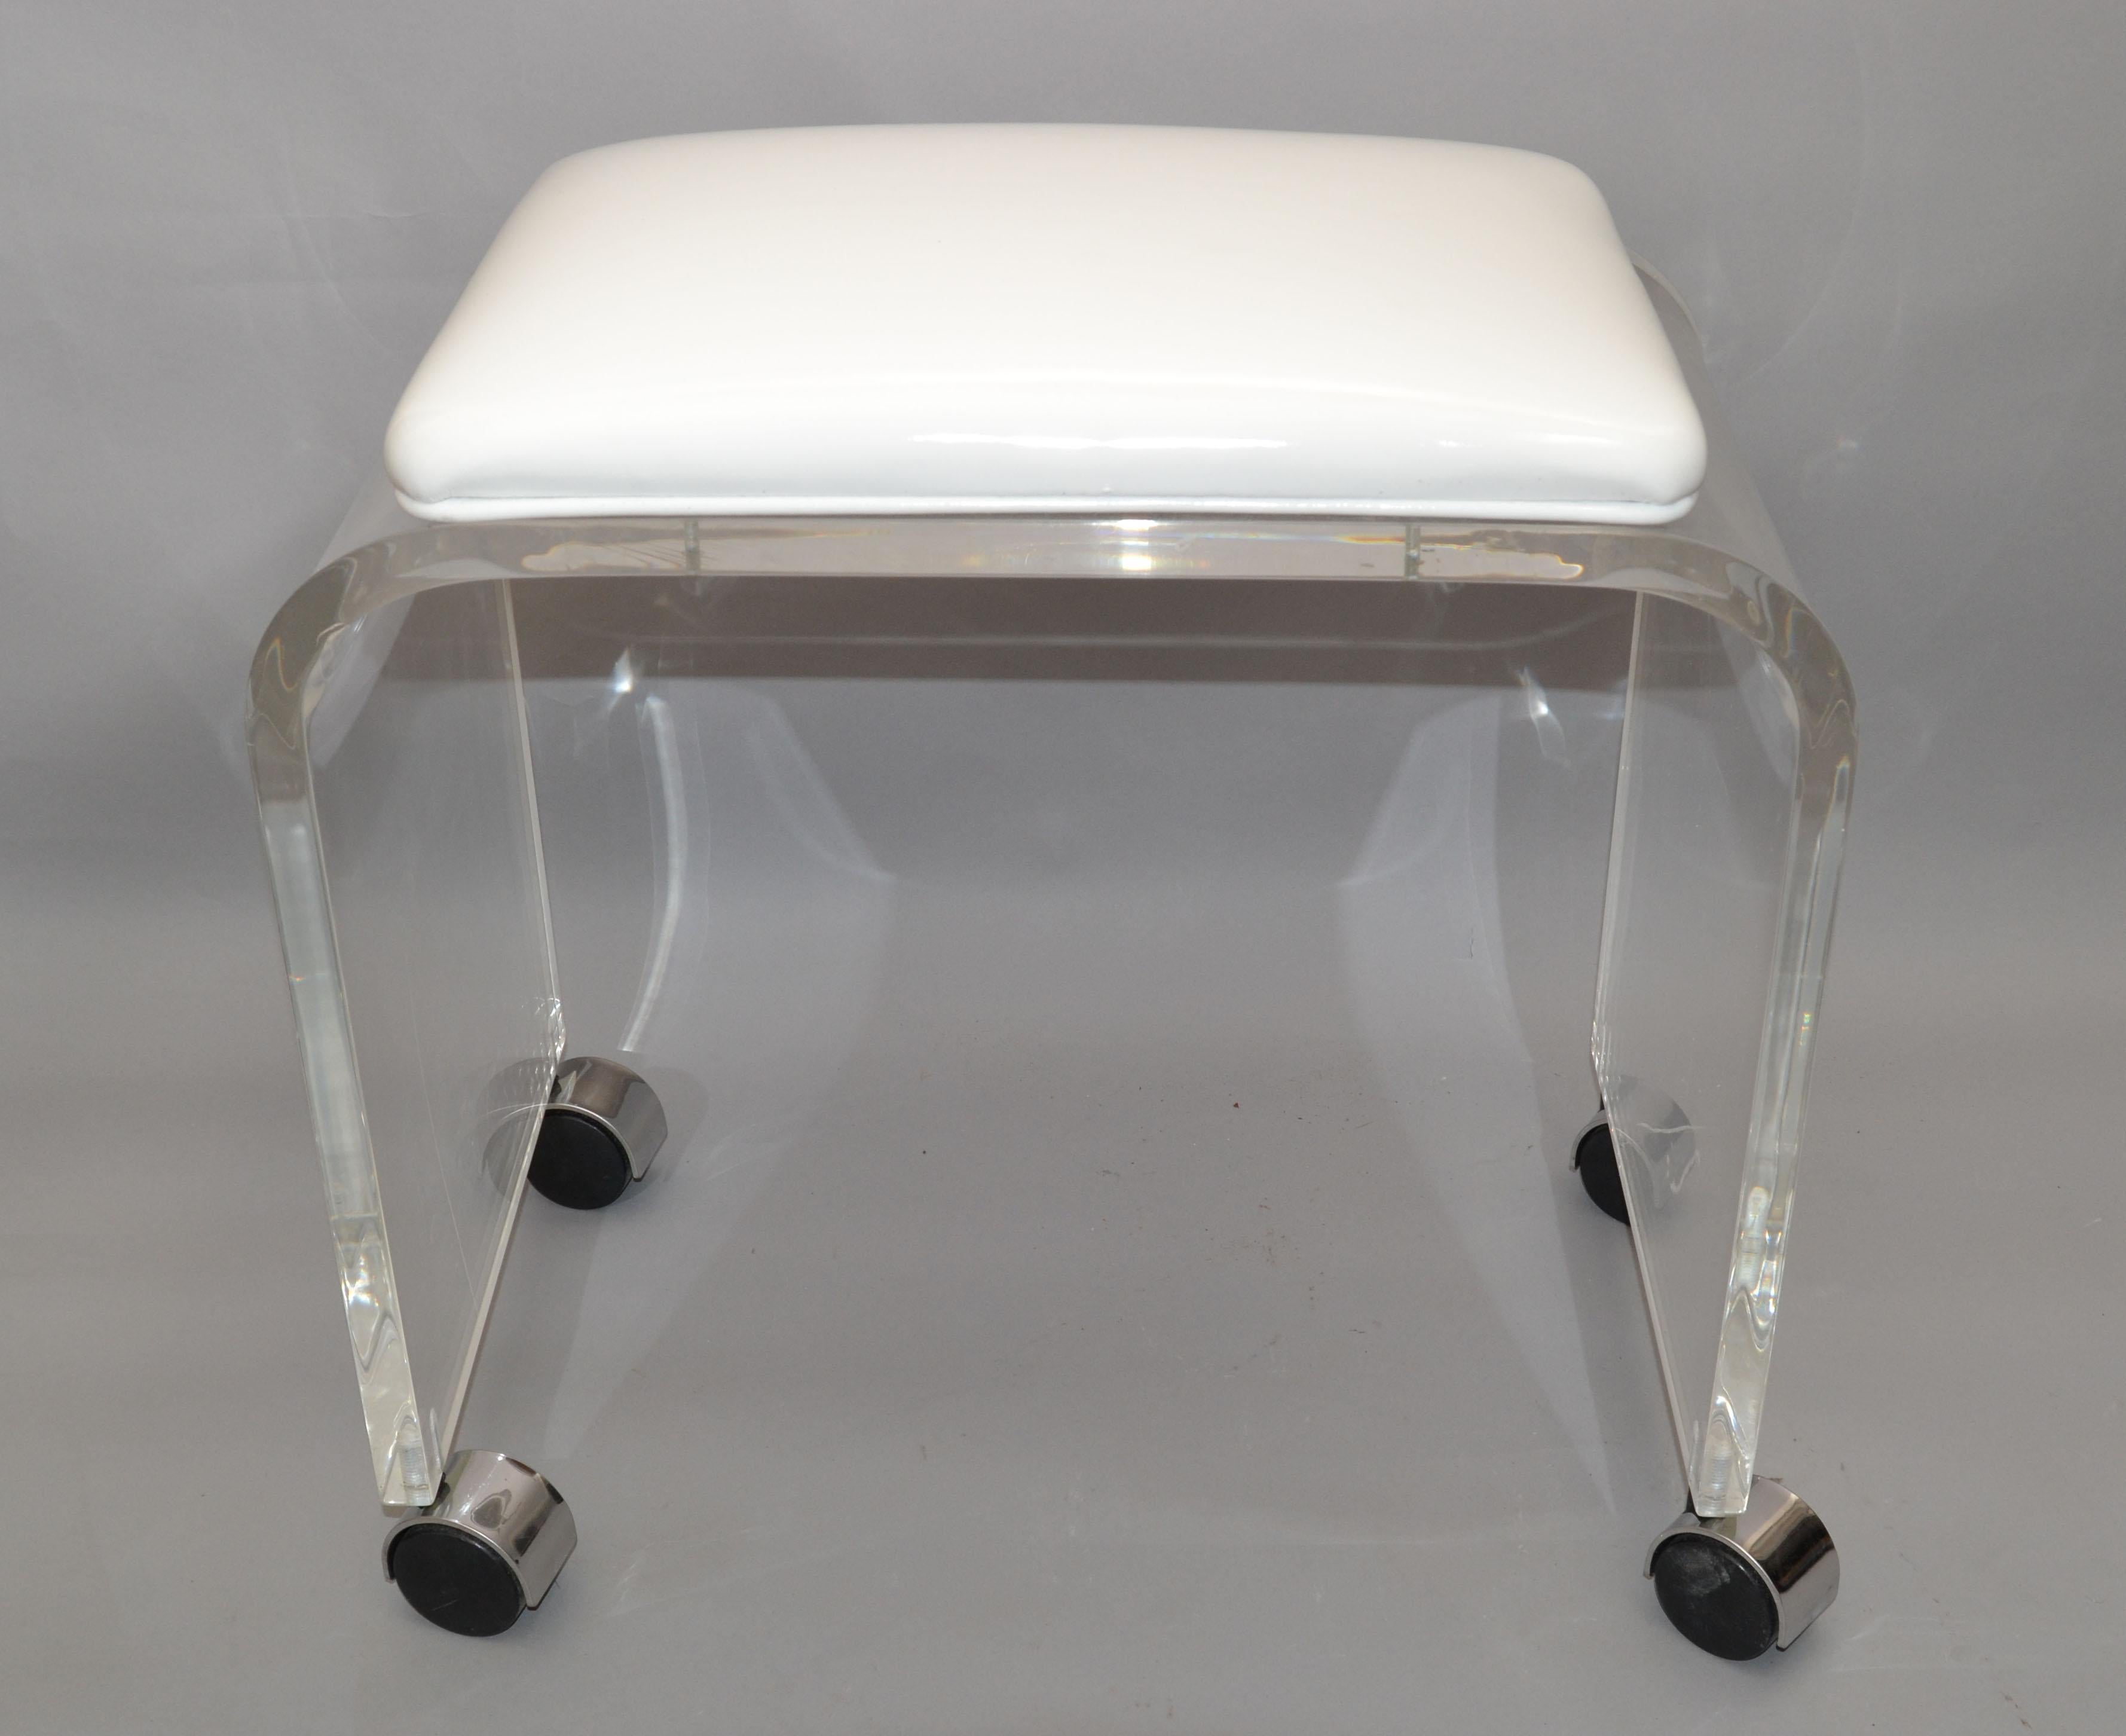 Mid-Century Modern Lucite stool, waterfall bench with white vinyl seat on chrome casters.
This stool can be used as a footstool, vanity stool or a place to put your magazine.
The stool is firm and sturdy, wheels run smoothly and is ready for a new